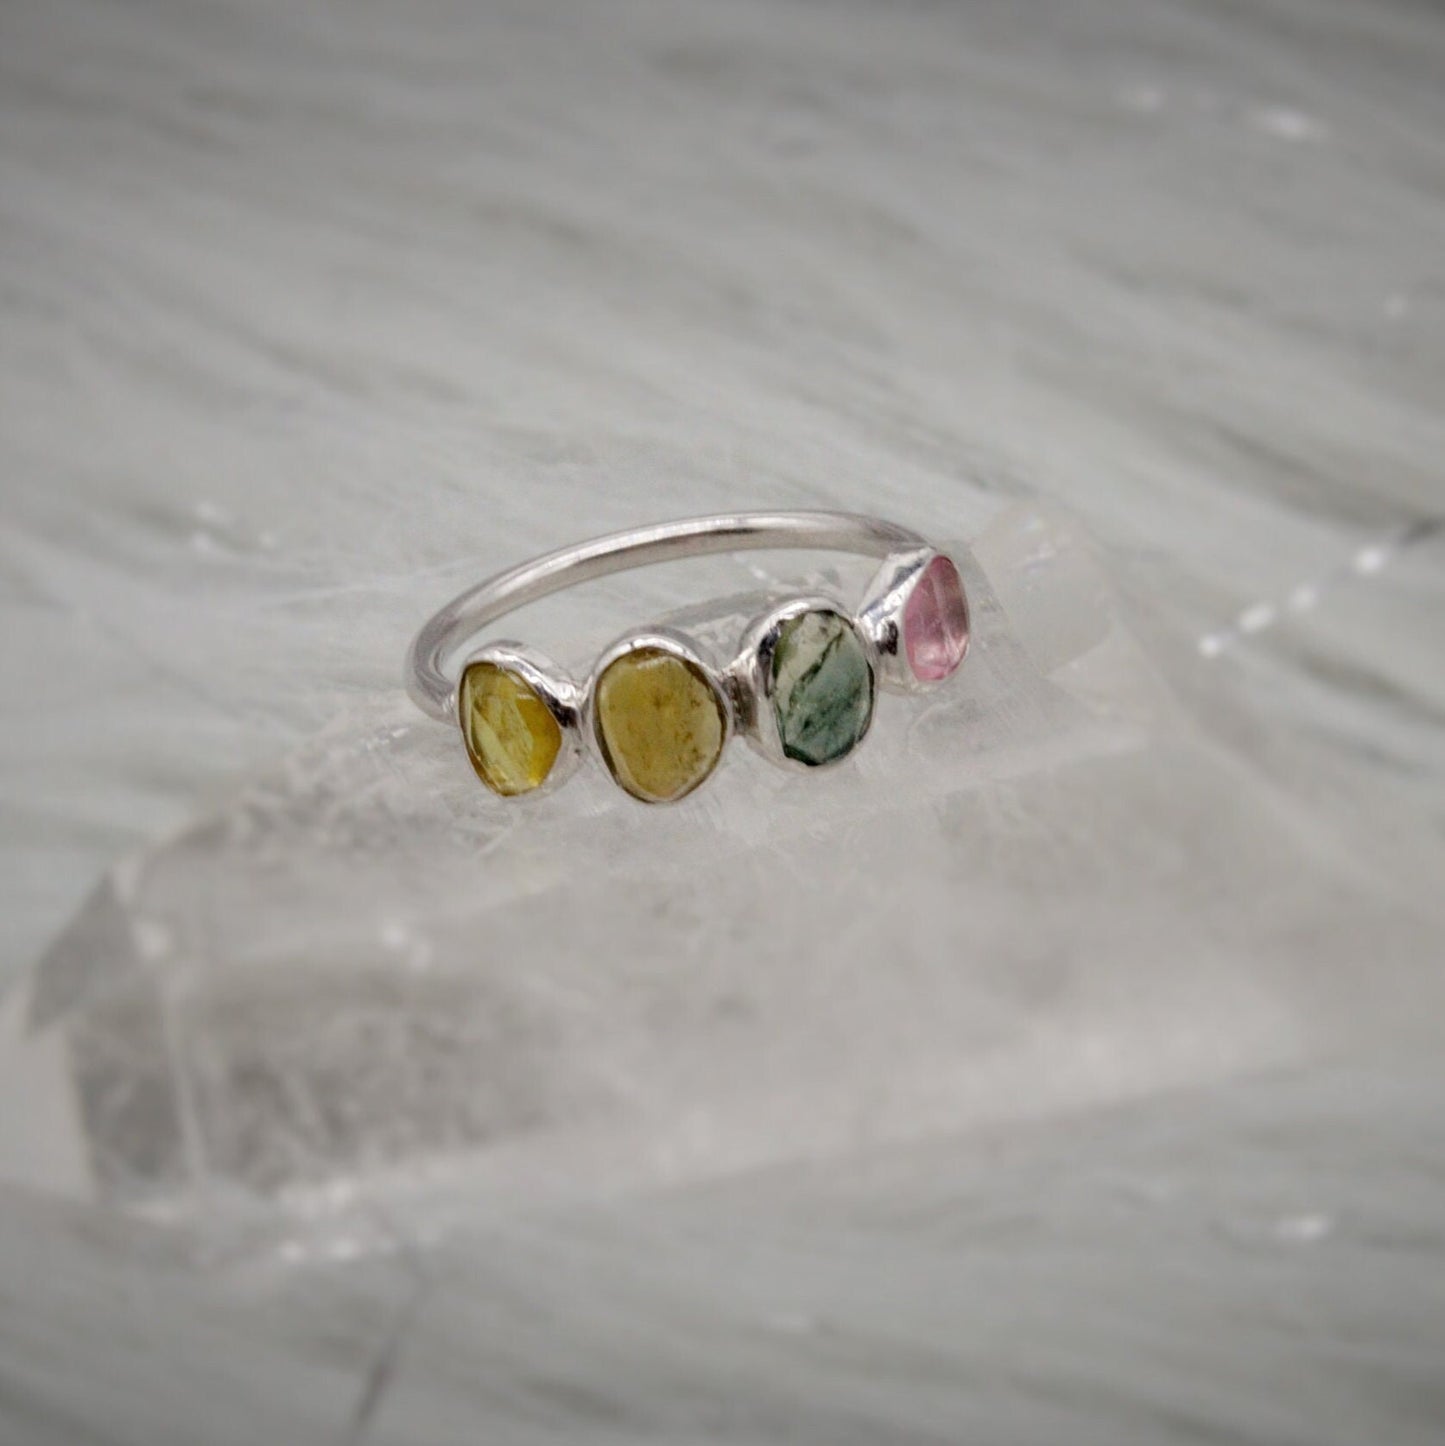 Pink Tourmaline Ring, Green Tourmaline, October Birthstone Jewelry, 925 Sterling Silver Ring, Rings For Women, Birthday Gift For Her